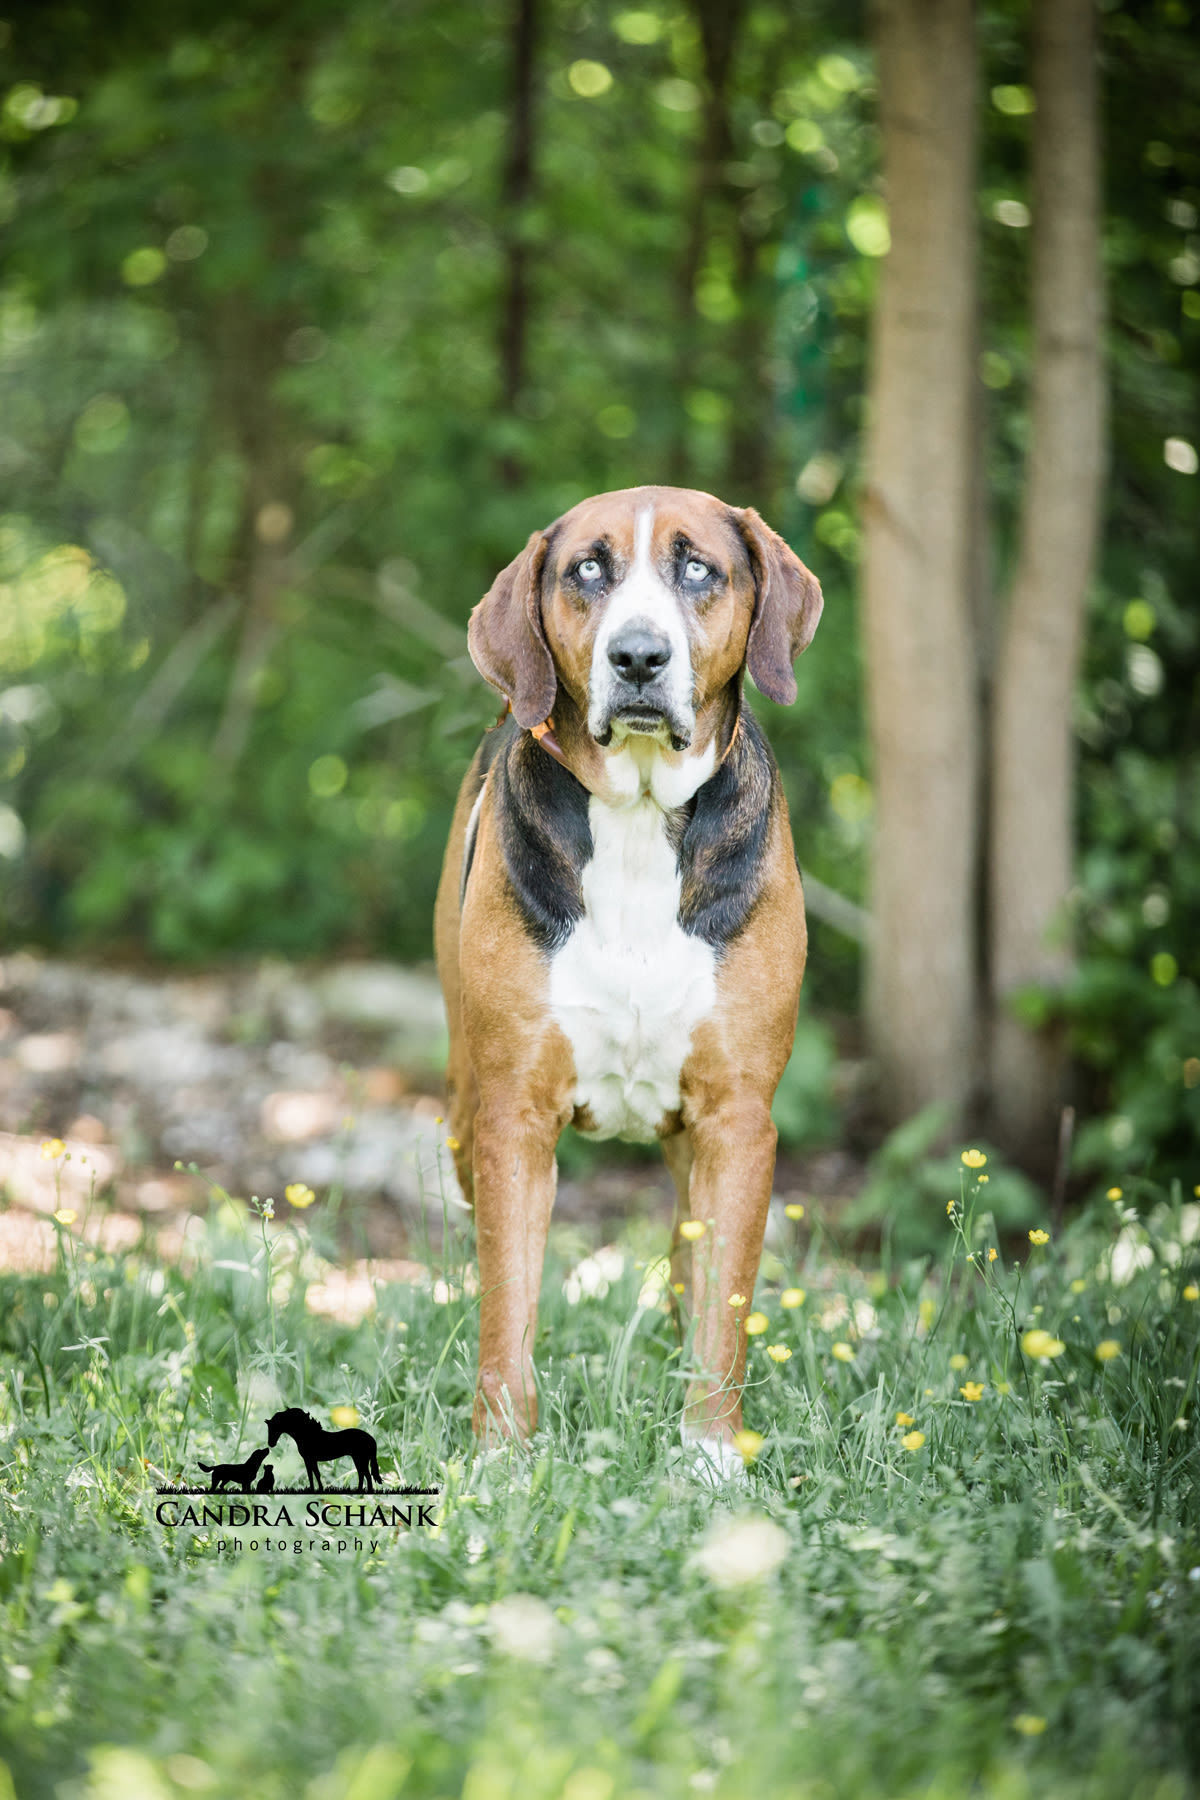 Rex, an adoptable Hound in Wiarton, ON, N0H 2T0 | Photo Image 2